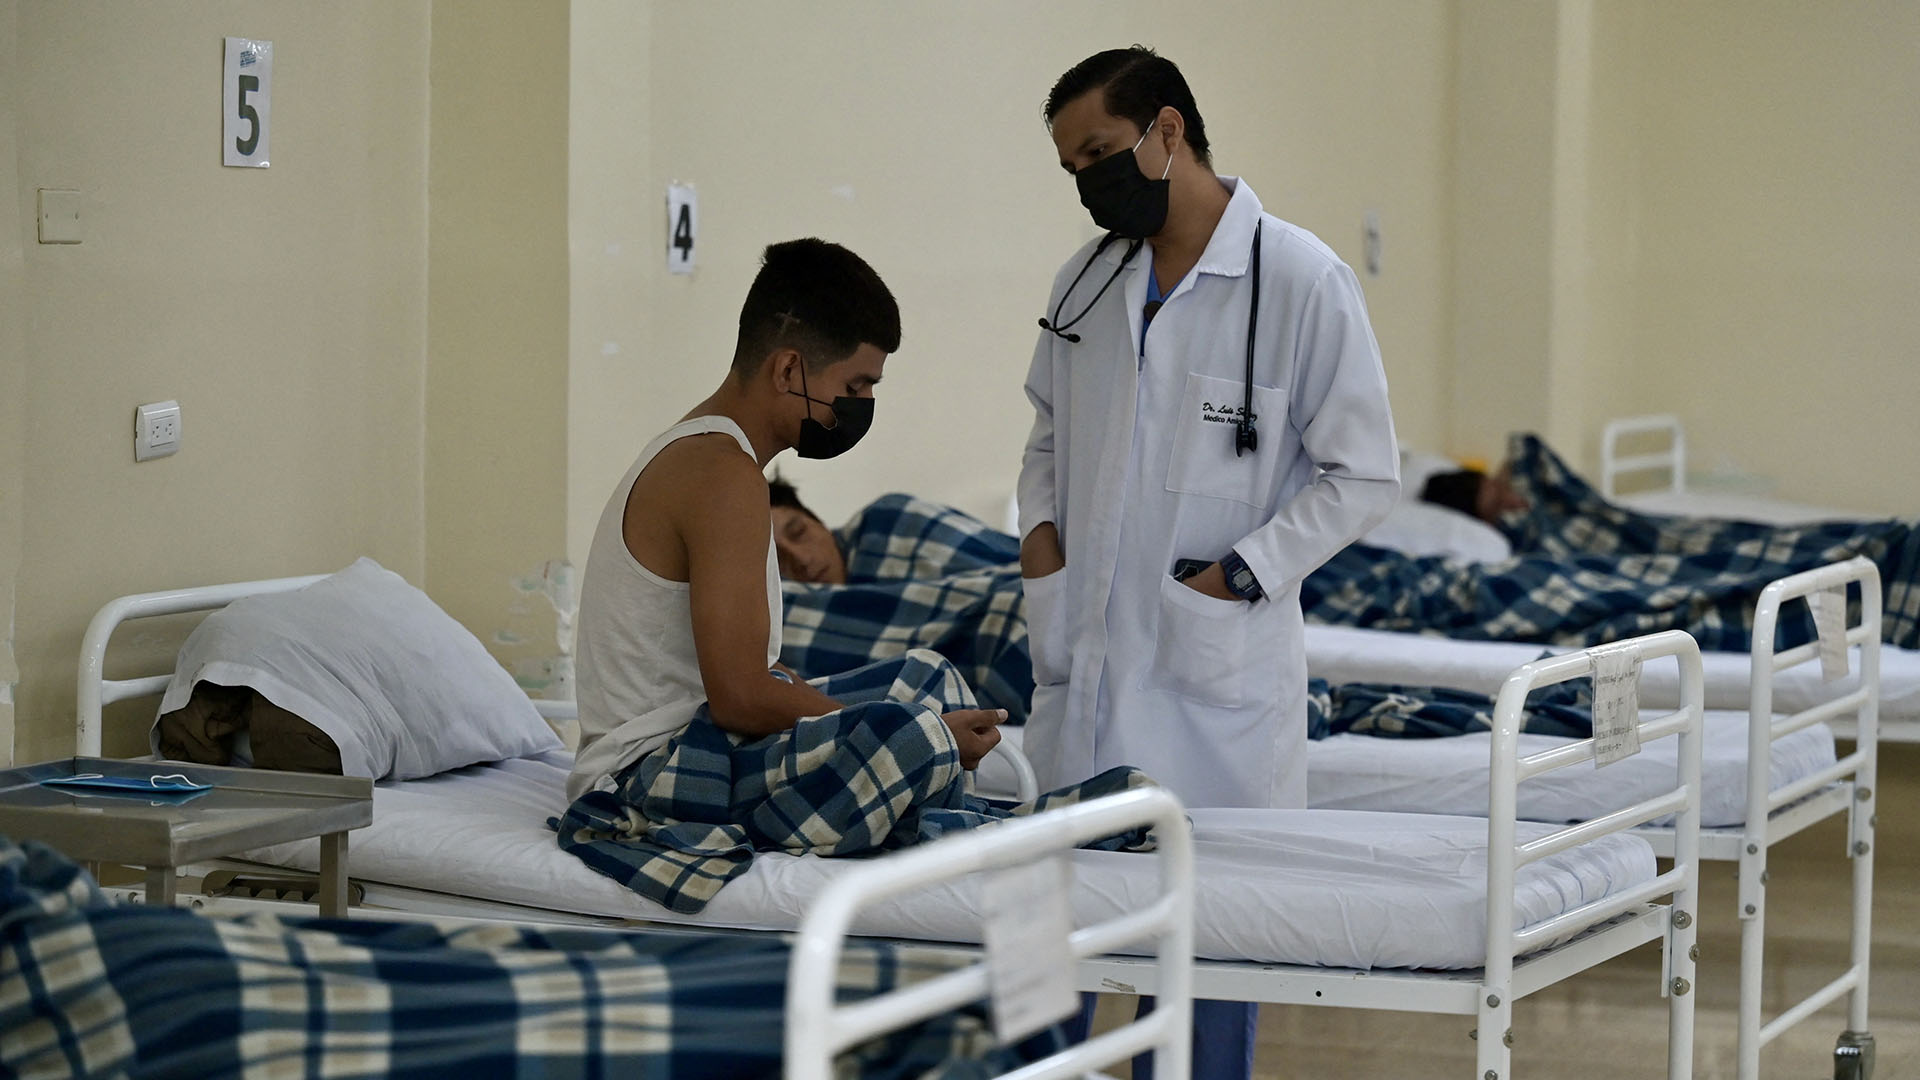 Municipal Program Physician "For a future without drugs", Luis Suárez, talks with Hugo Mora, a patient with addiction problems, in the detoxification area of ​​the Bicentennial hospital in Guayaquil.  (Photo by MARCOS PIN / AFP)